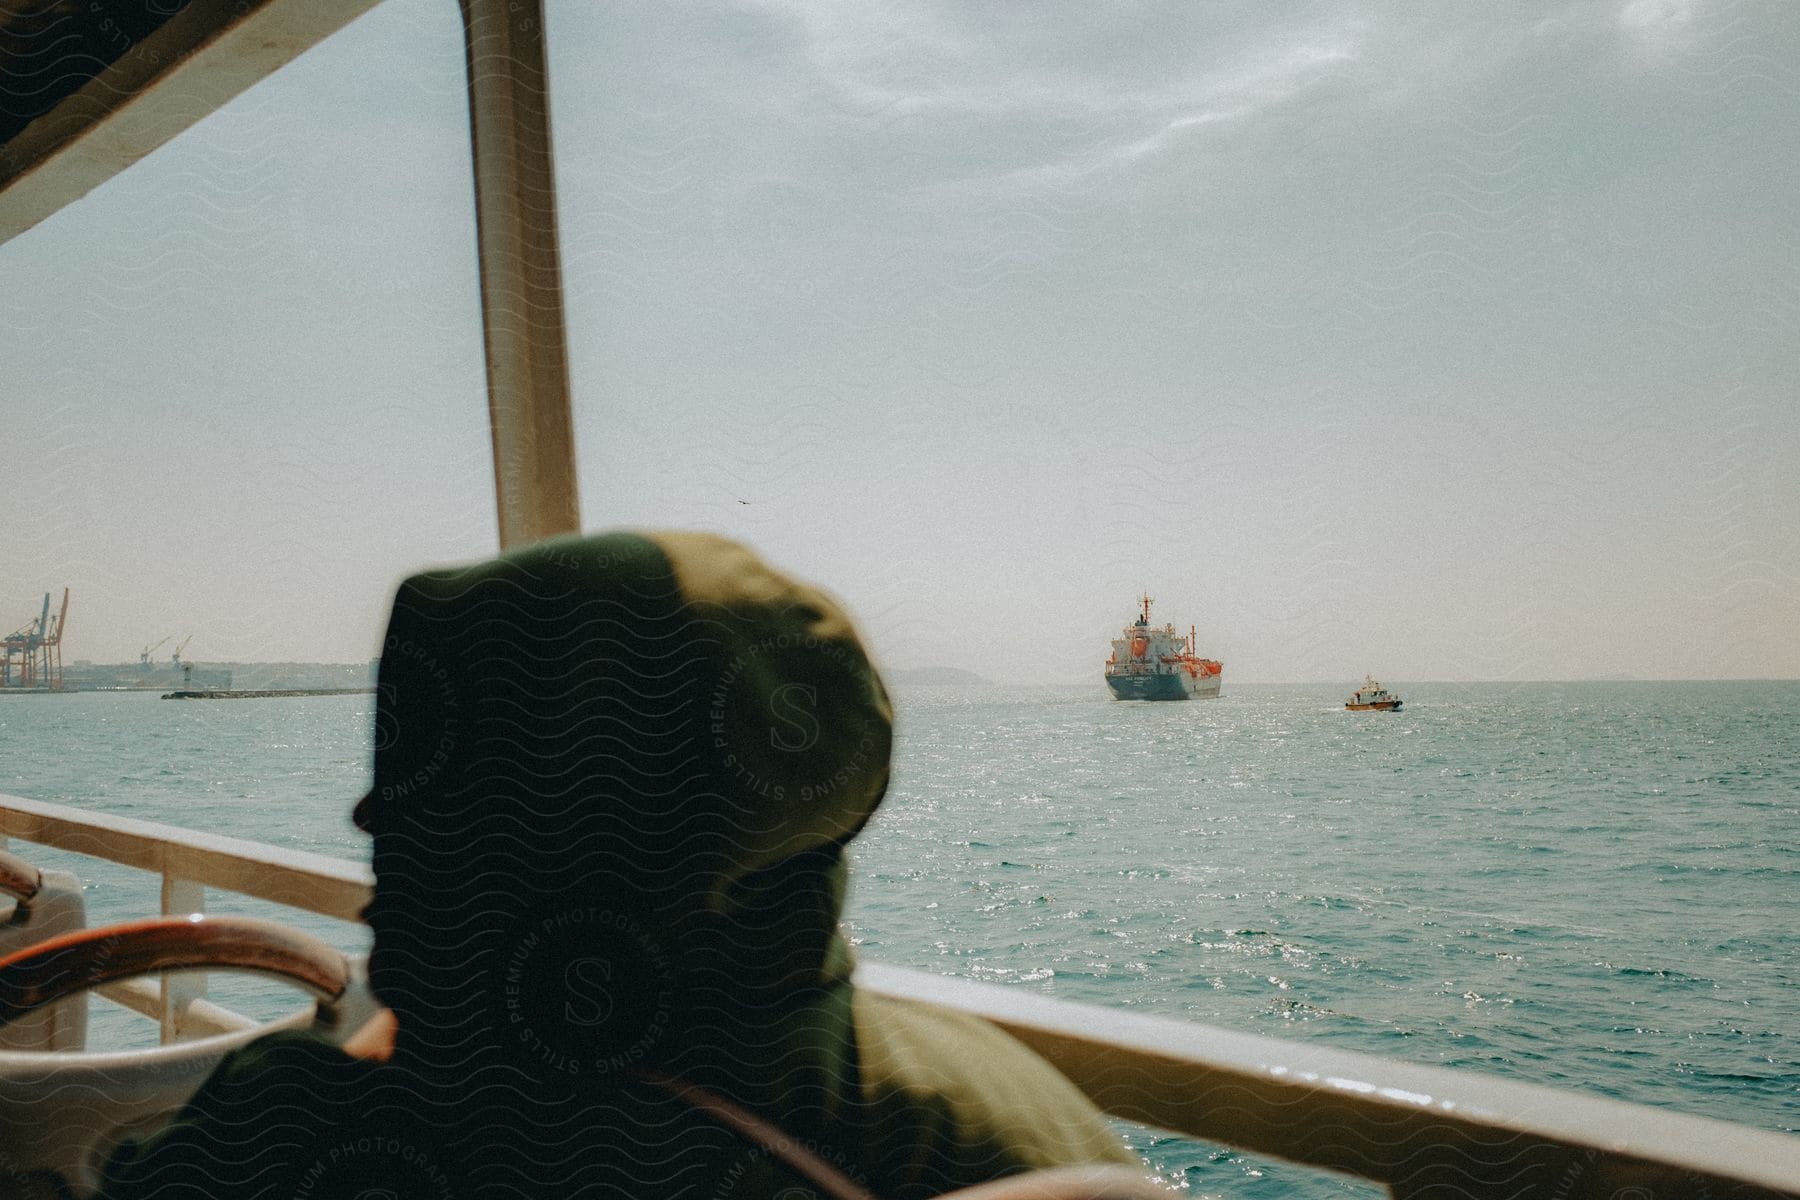 Person wearing a hooded jacket sitting on a boat as ships sail in the distance